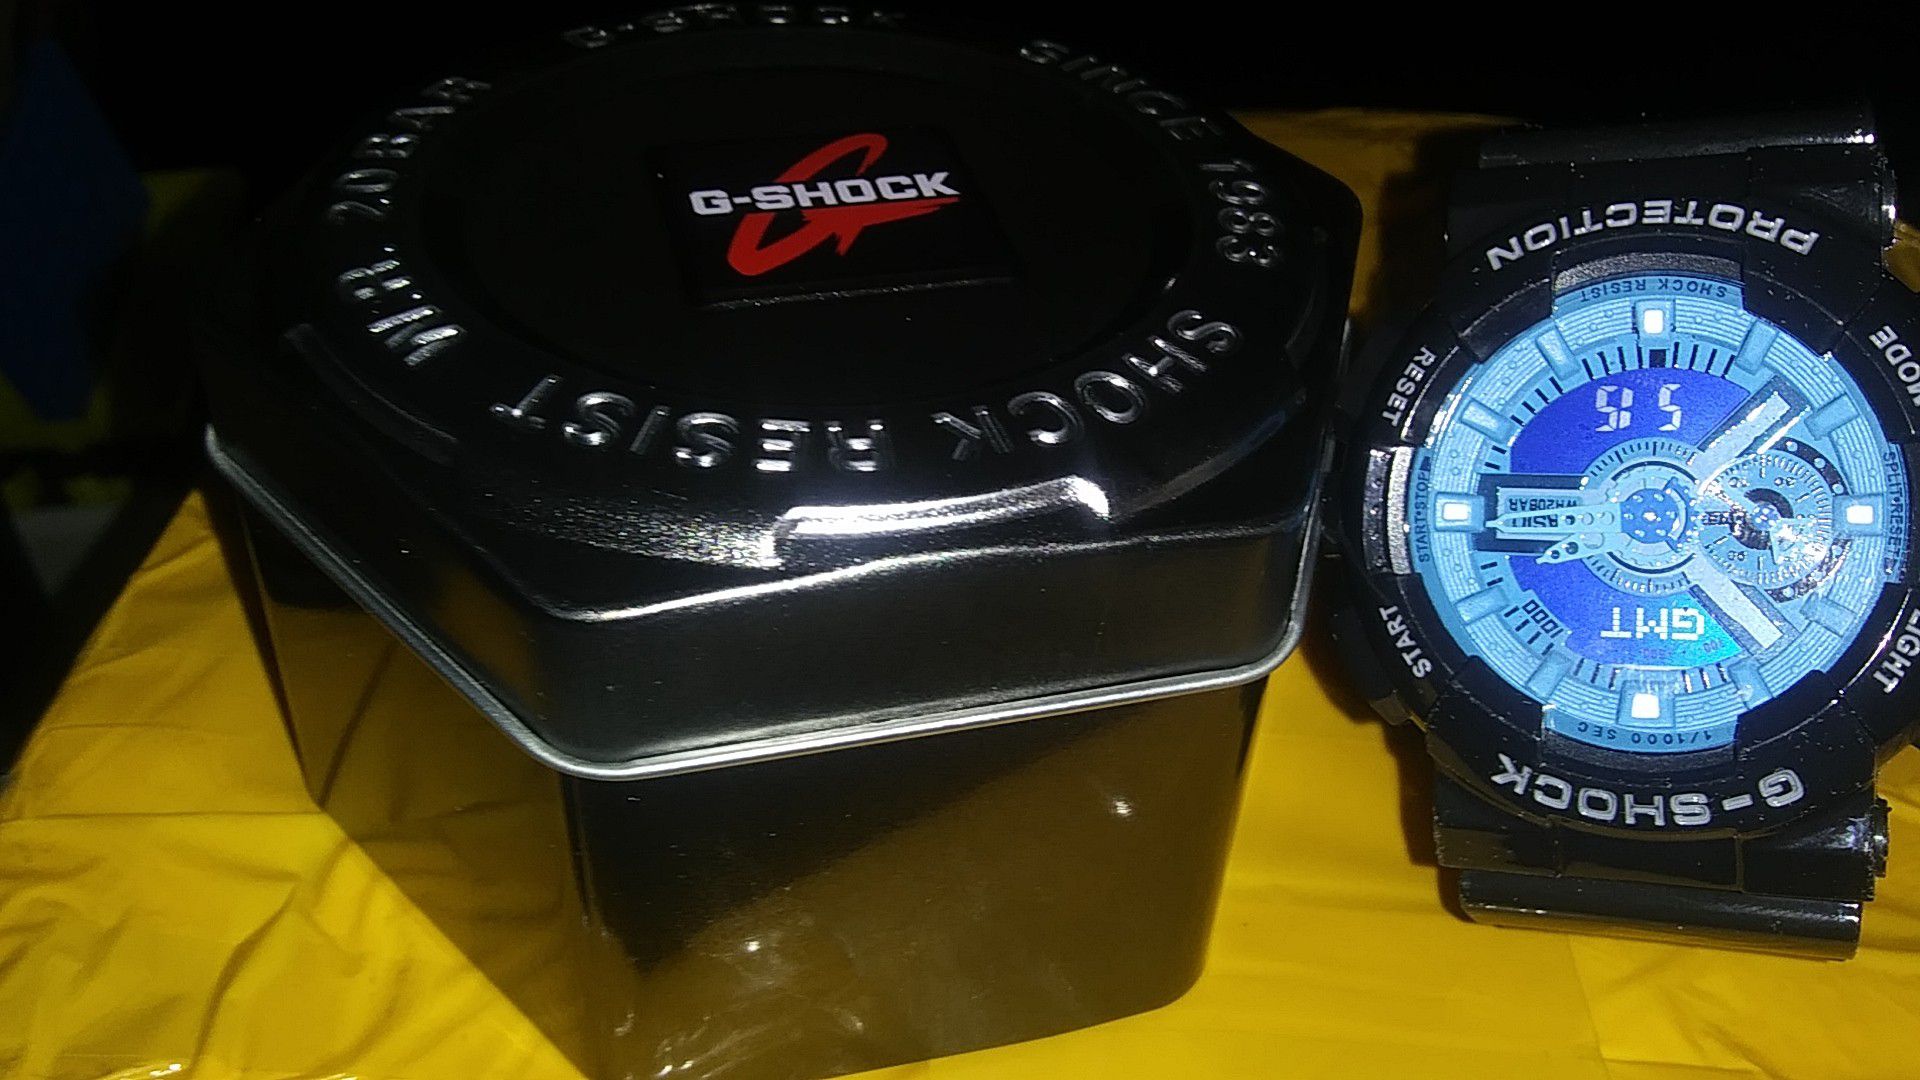 Brand new g shock watch with case .